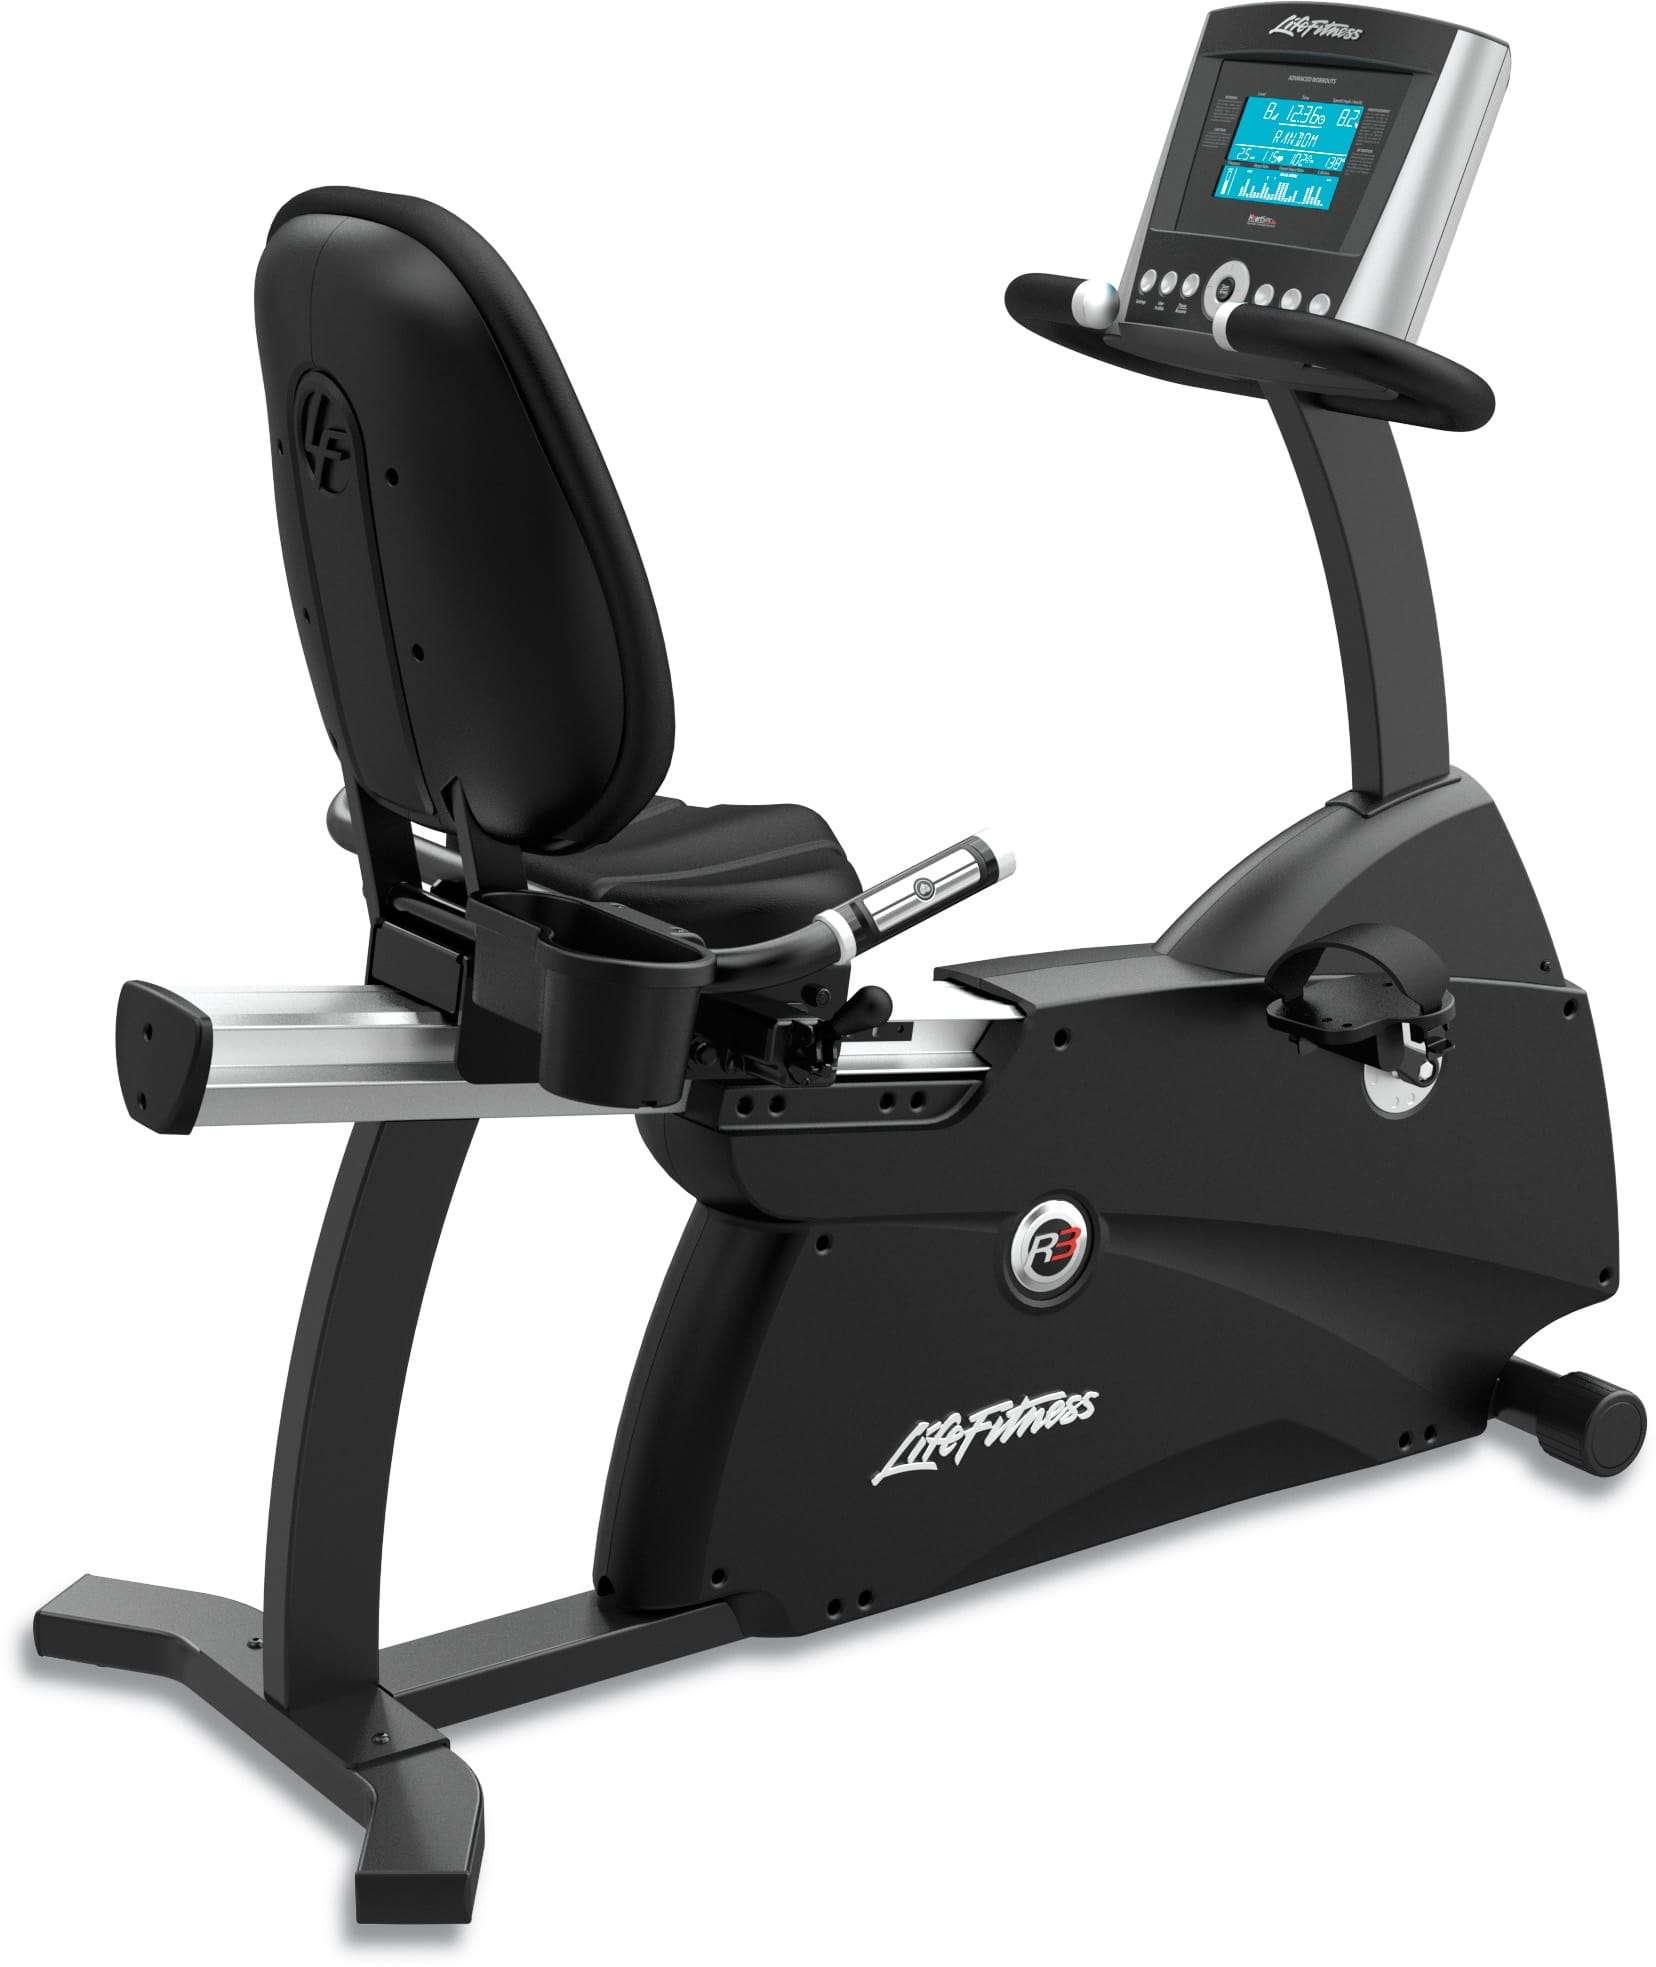 Exercise Bikes Recumbent Vs Stationary Vs Indoor Cycles intended for Benefits Cycling Stationary Bike